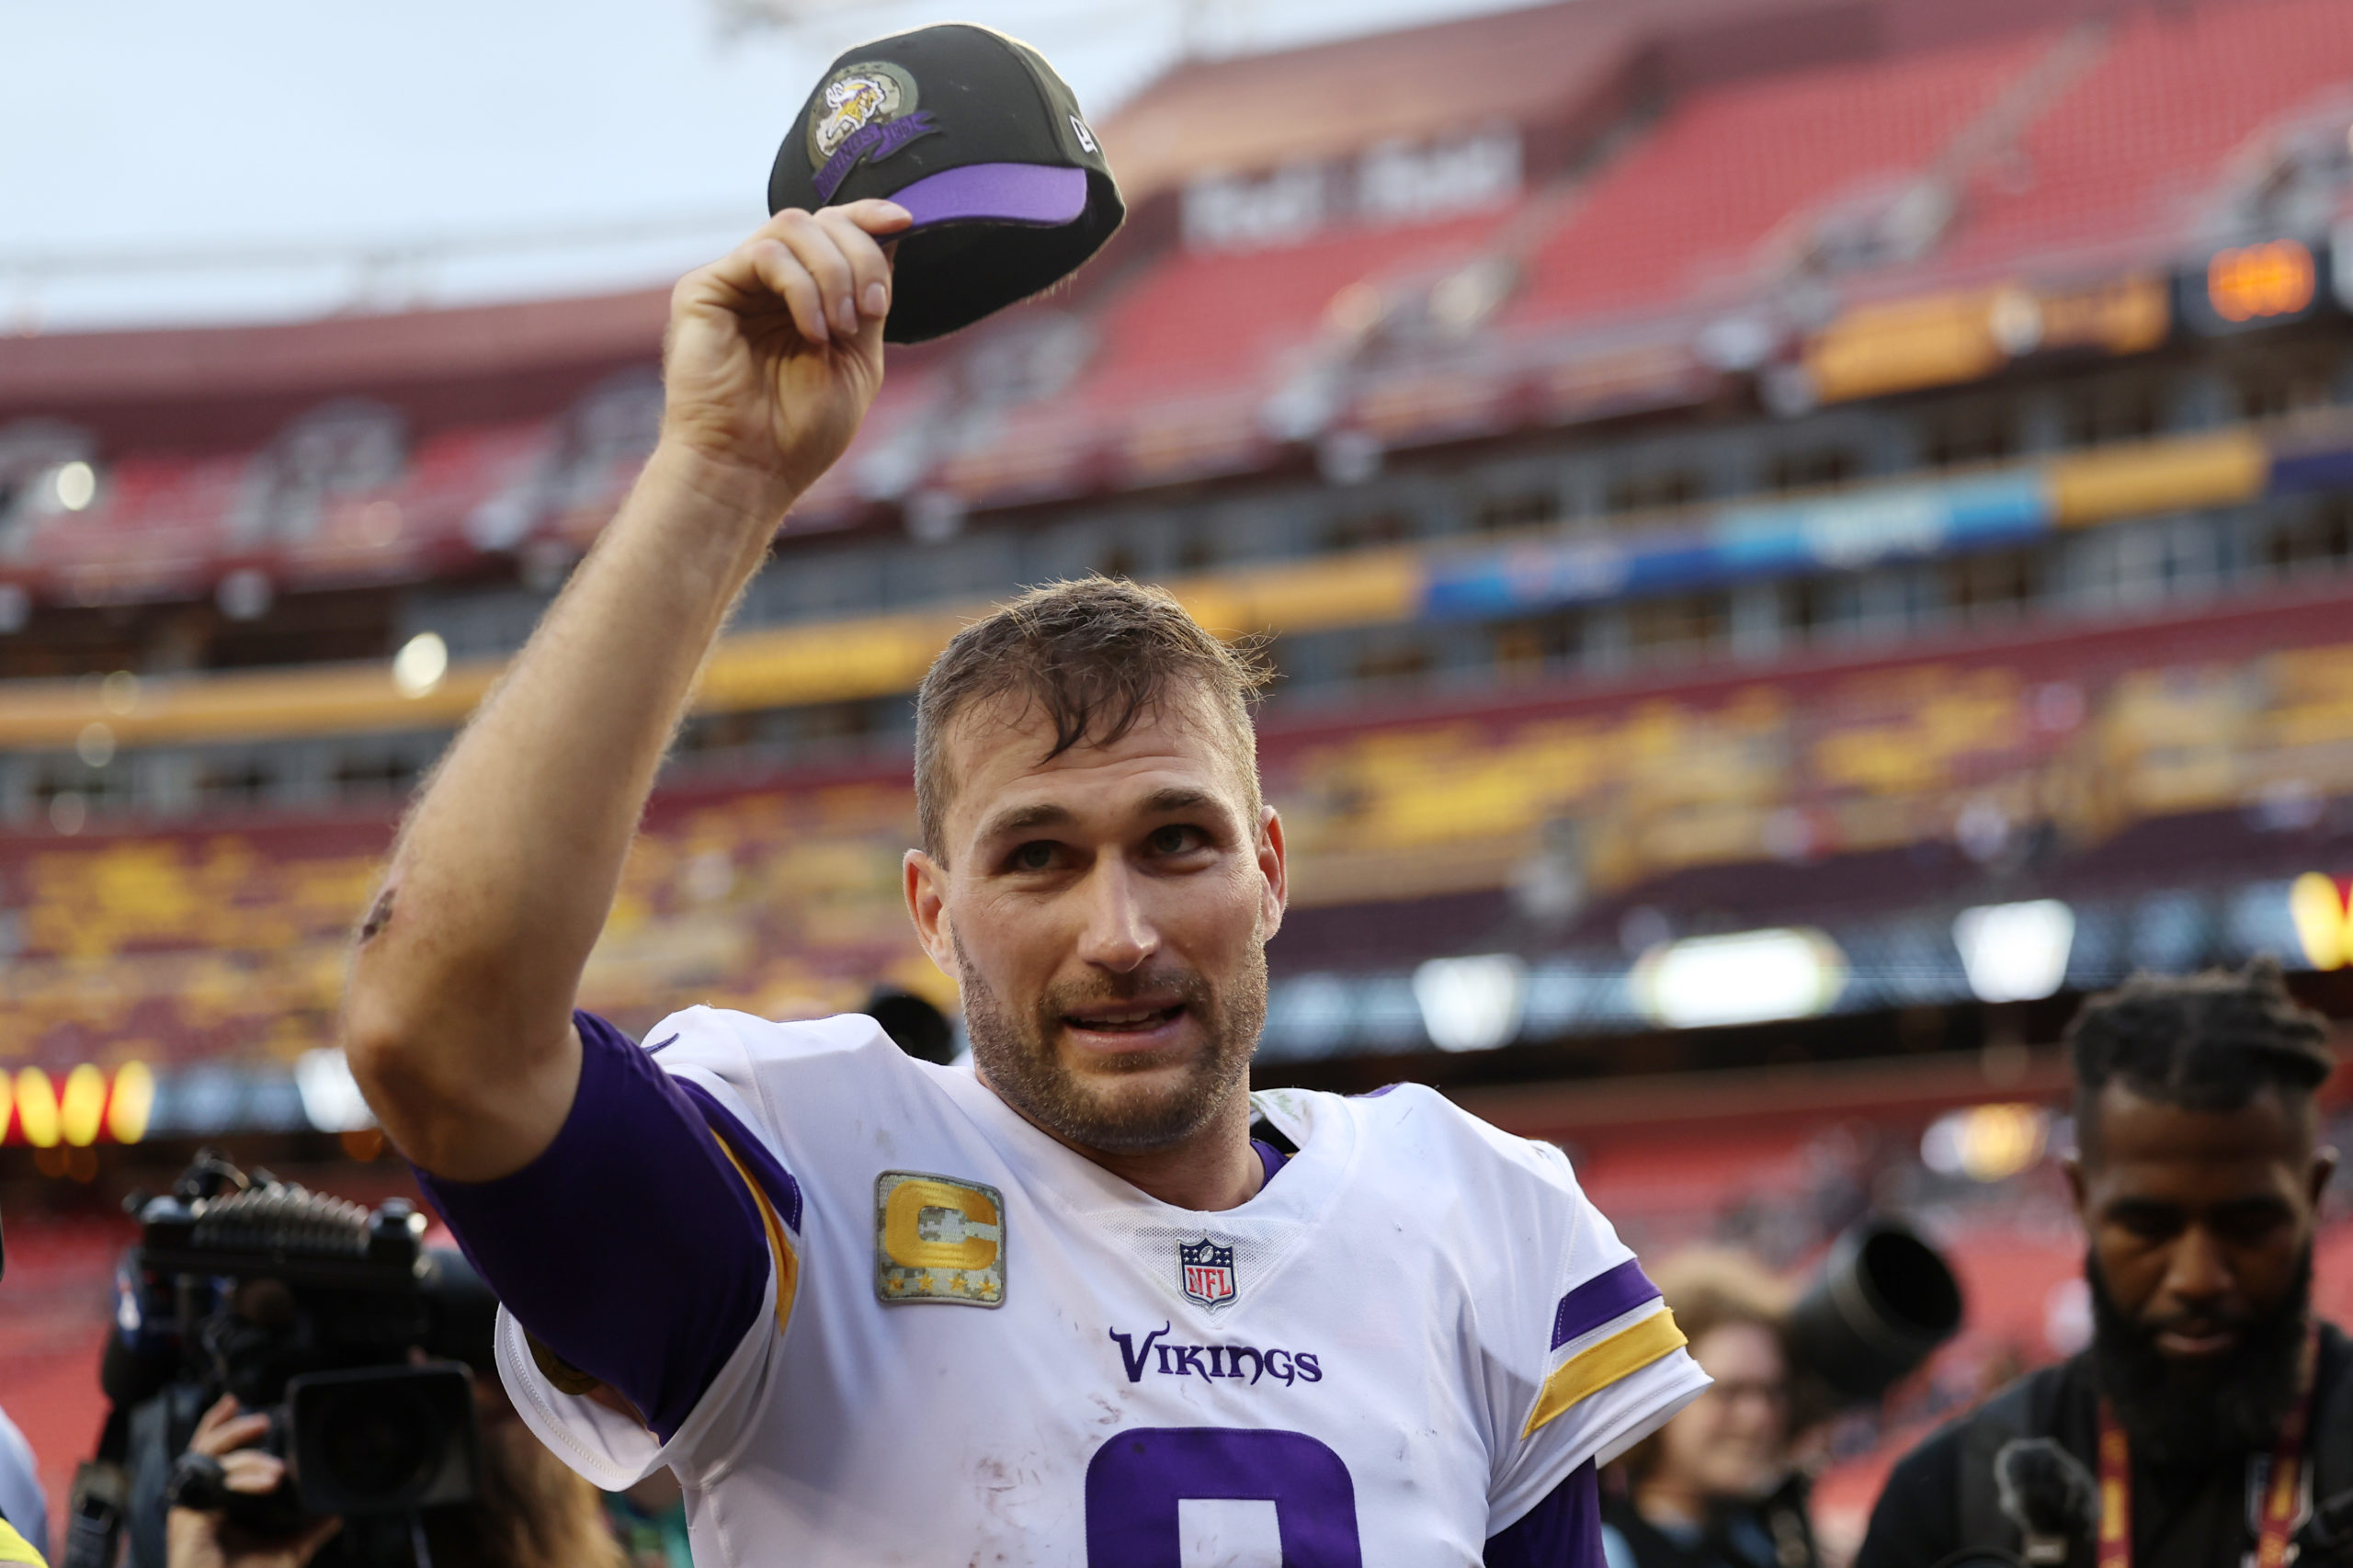 LANDOVER, MARYLAND - NOVEMBER 06: Kirk Cousins #8 of the Minnesota Vikings celebrates after the Wikings defeated the Washington Commanders 20-17 at FedExField on November 06, 2022 in Landover, Maryland. Scott Taetsch/Getty Images